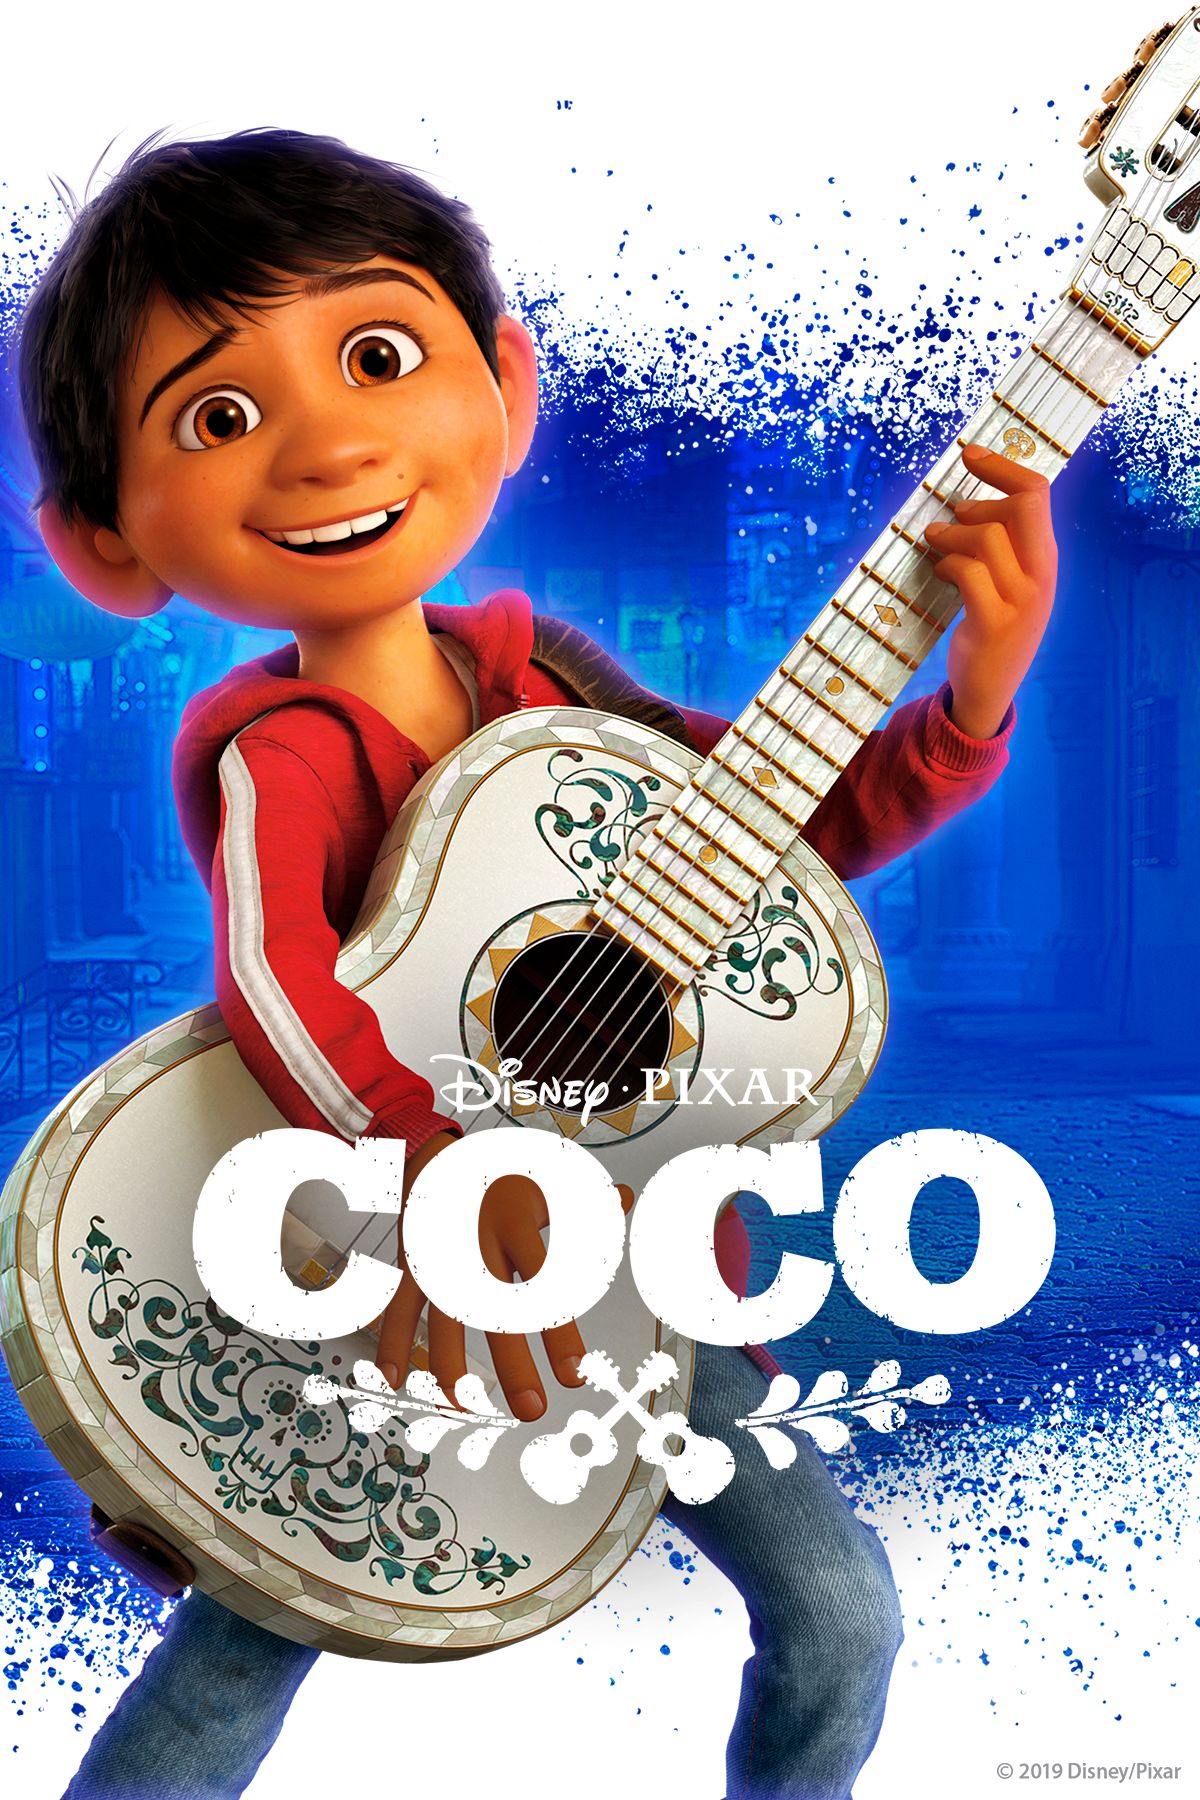 Coco full movie download free